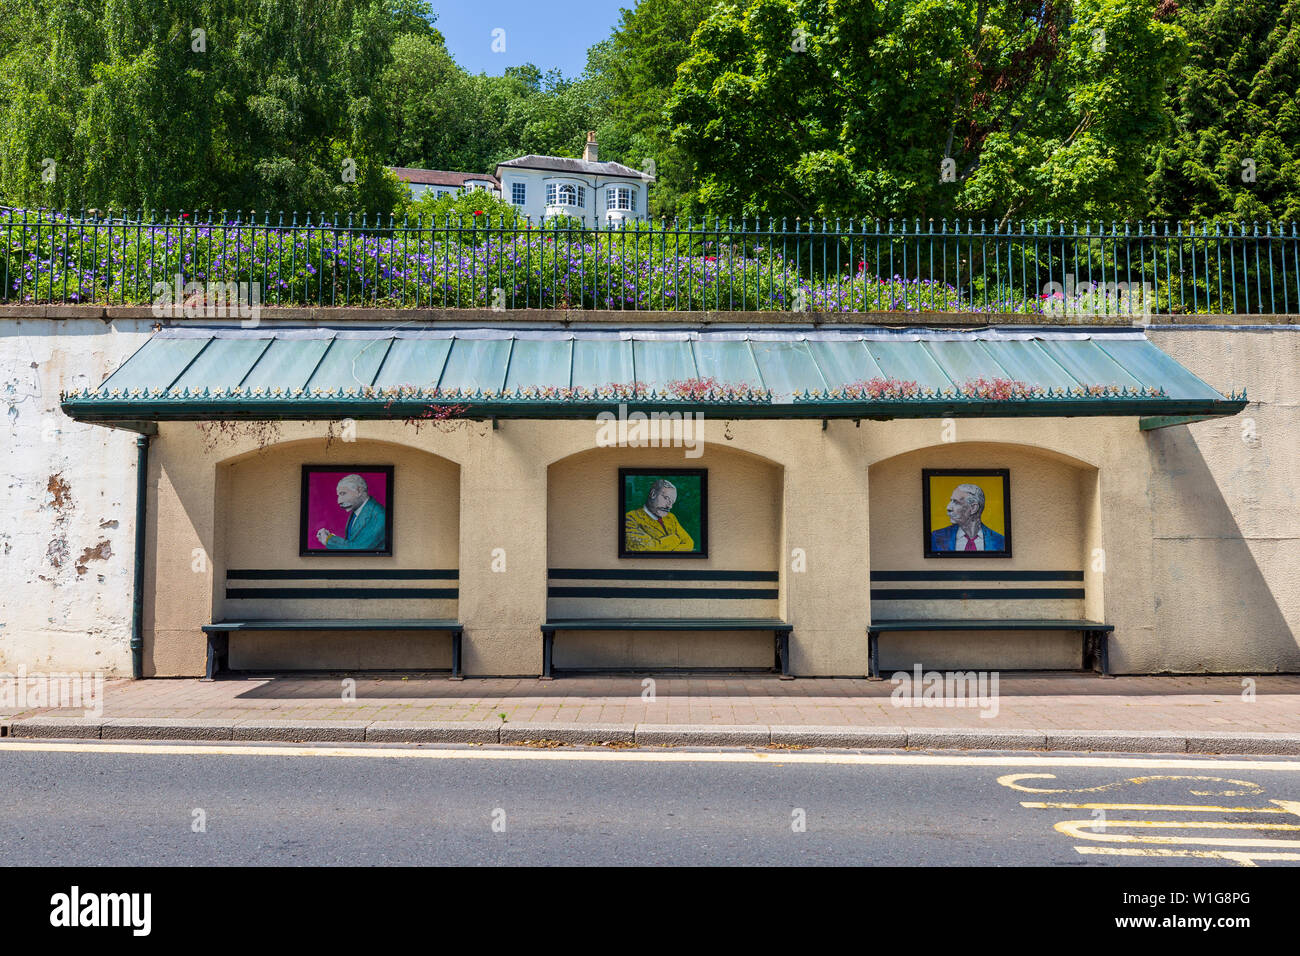 The 1930s bus shelter with Banksy-style artwork of Edward Elgar below the Rose Garden at Great Malvern, Worcestershire, England Stock Photo